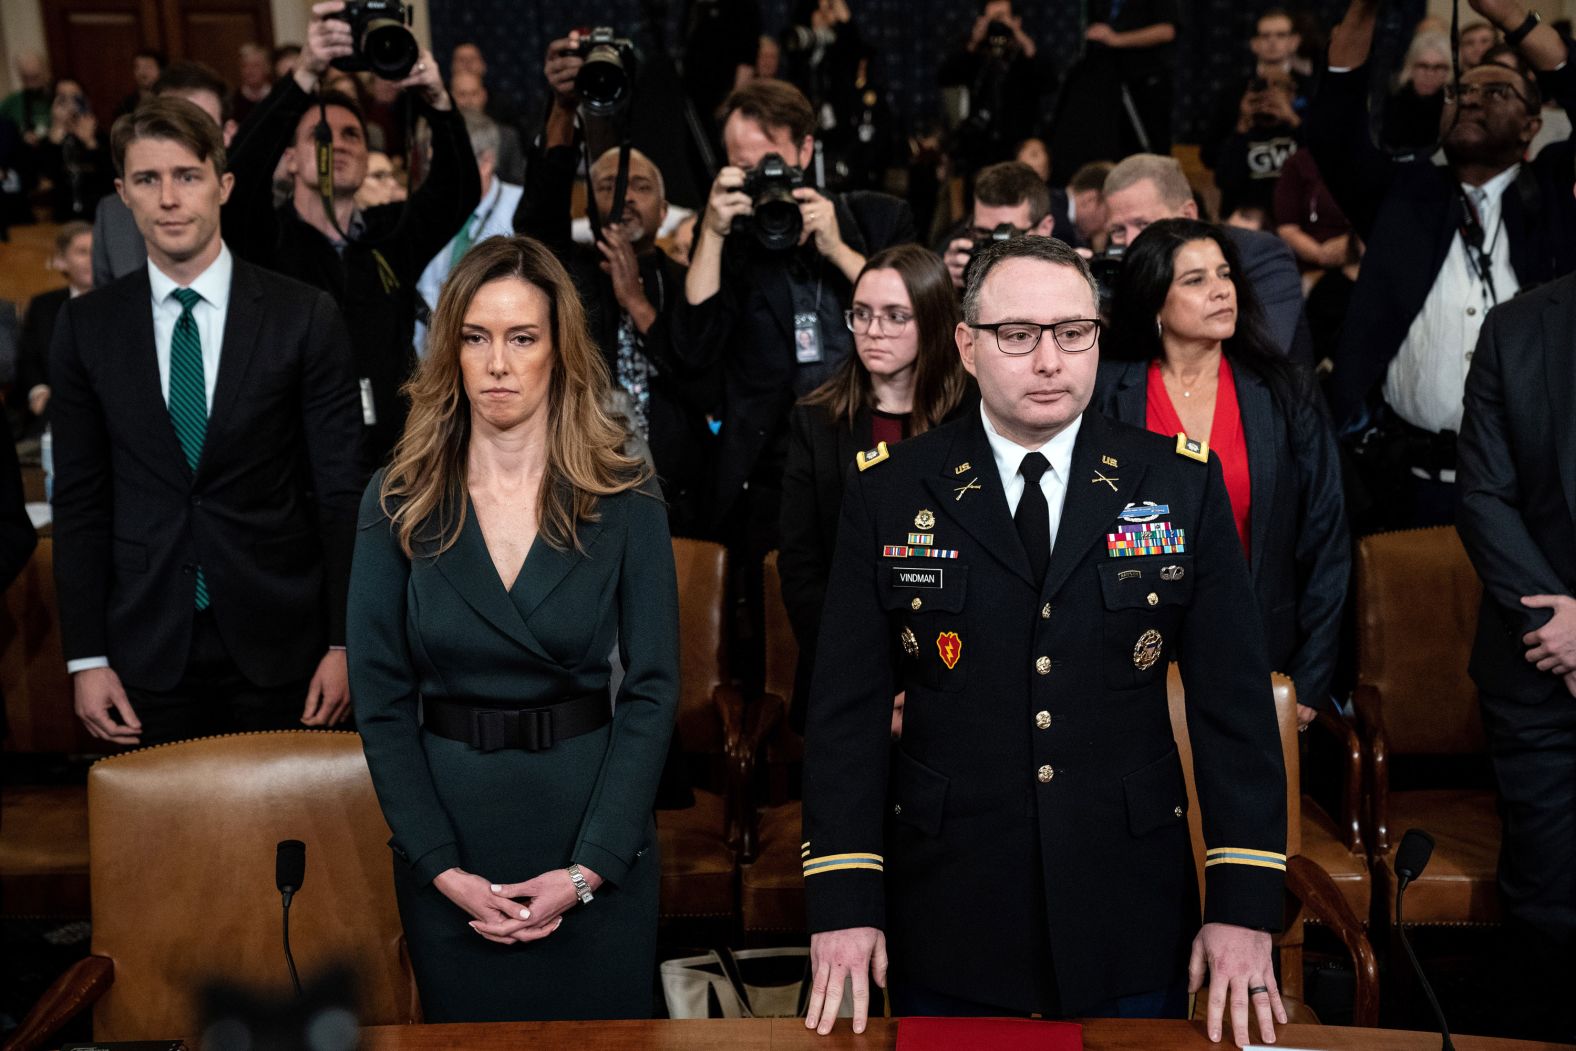 Jennifer Williams, a senior aide to Vice President Mike Pence, and Army Lt. Col. Alexander Vindman, the top Ukraine expert at the National Security Council, await the start of their testimony in Washington on November 19. It was <a href="index.php?page=&url=https%3A%2F%2Fwww.cnn.com%2F2019%2F11%2F19%2Fpolitics%2Fpublic-impeachment-hearing-day-3%2Findex.html" target="_blank">the third day of public hearings</a> related to the impeachment inquiry.